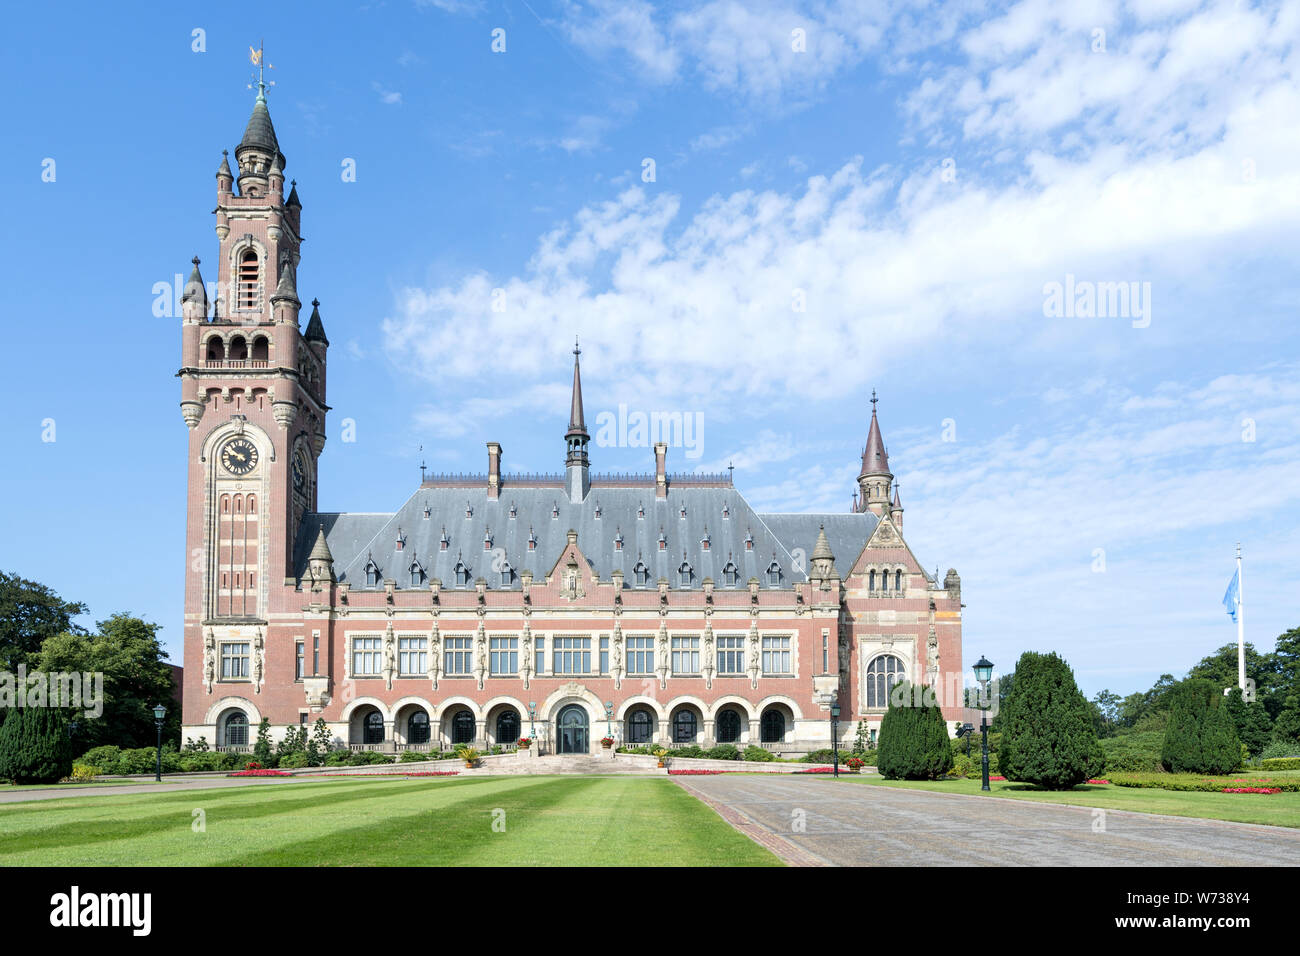 Vredespaleis (Peace Palace), an international law administrative building in The Hague, The Netherlands. It houses the International Court of Justice. Stock Photo